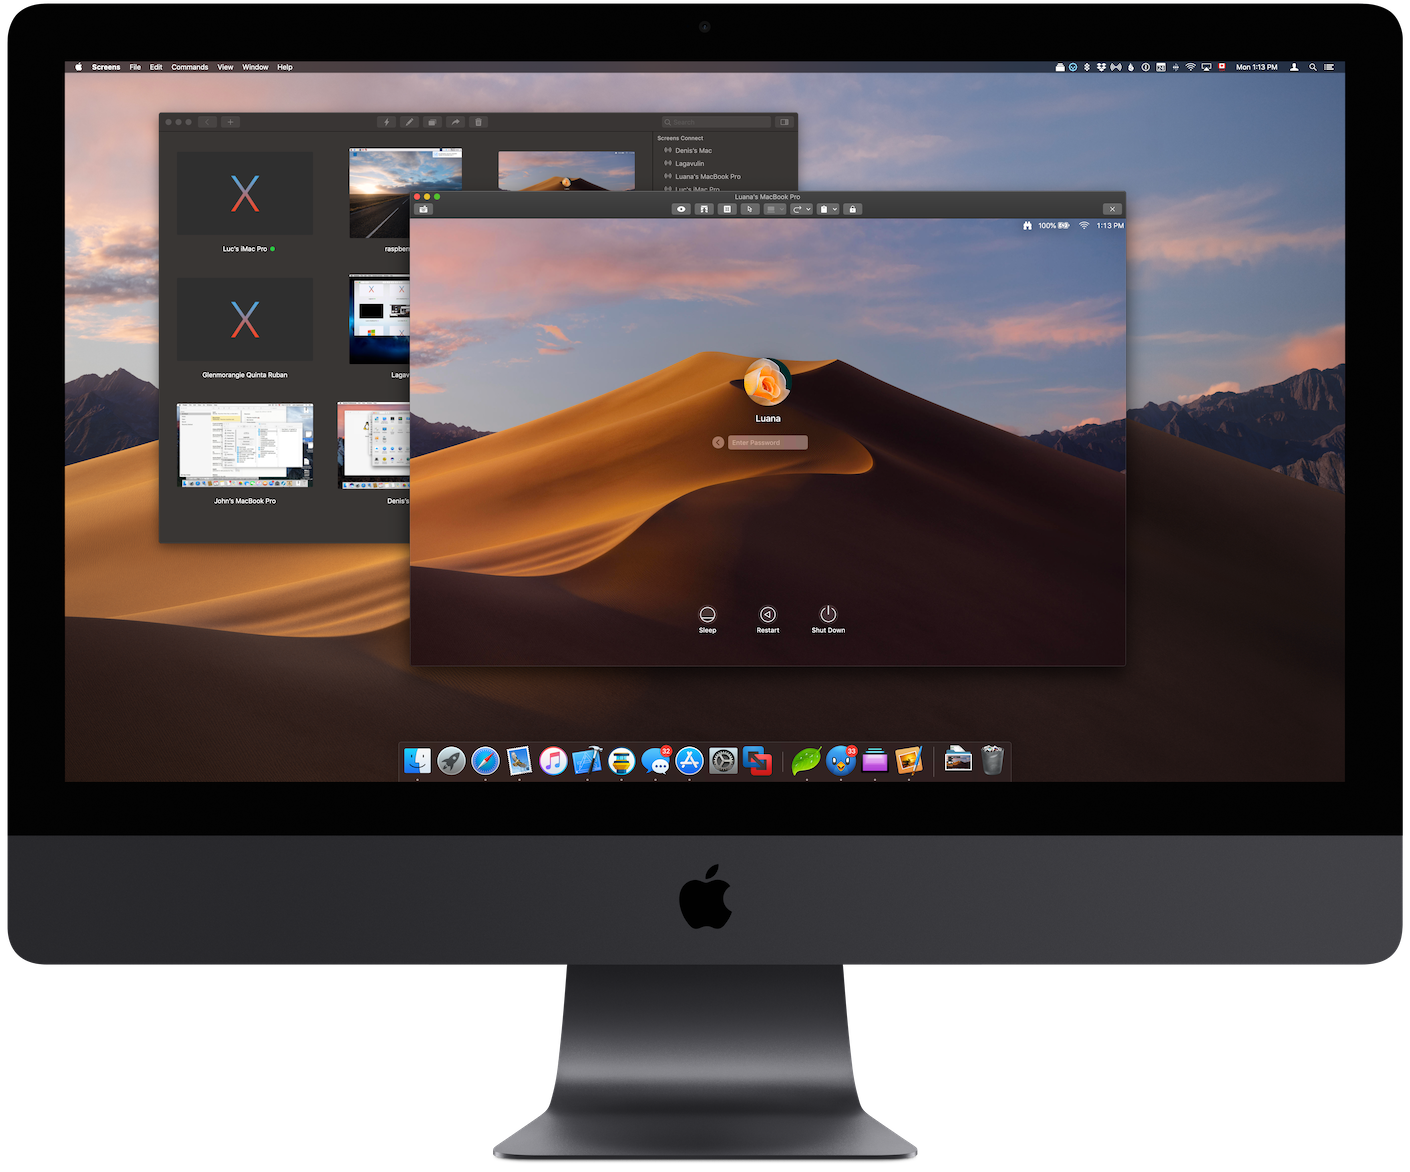 Download vlc player for mac 10.9.5